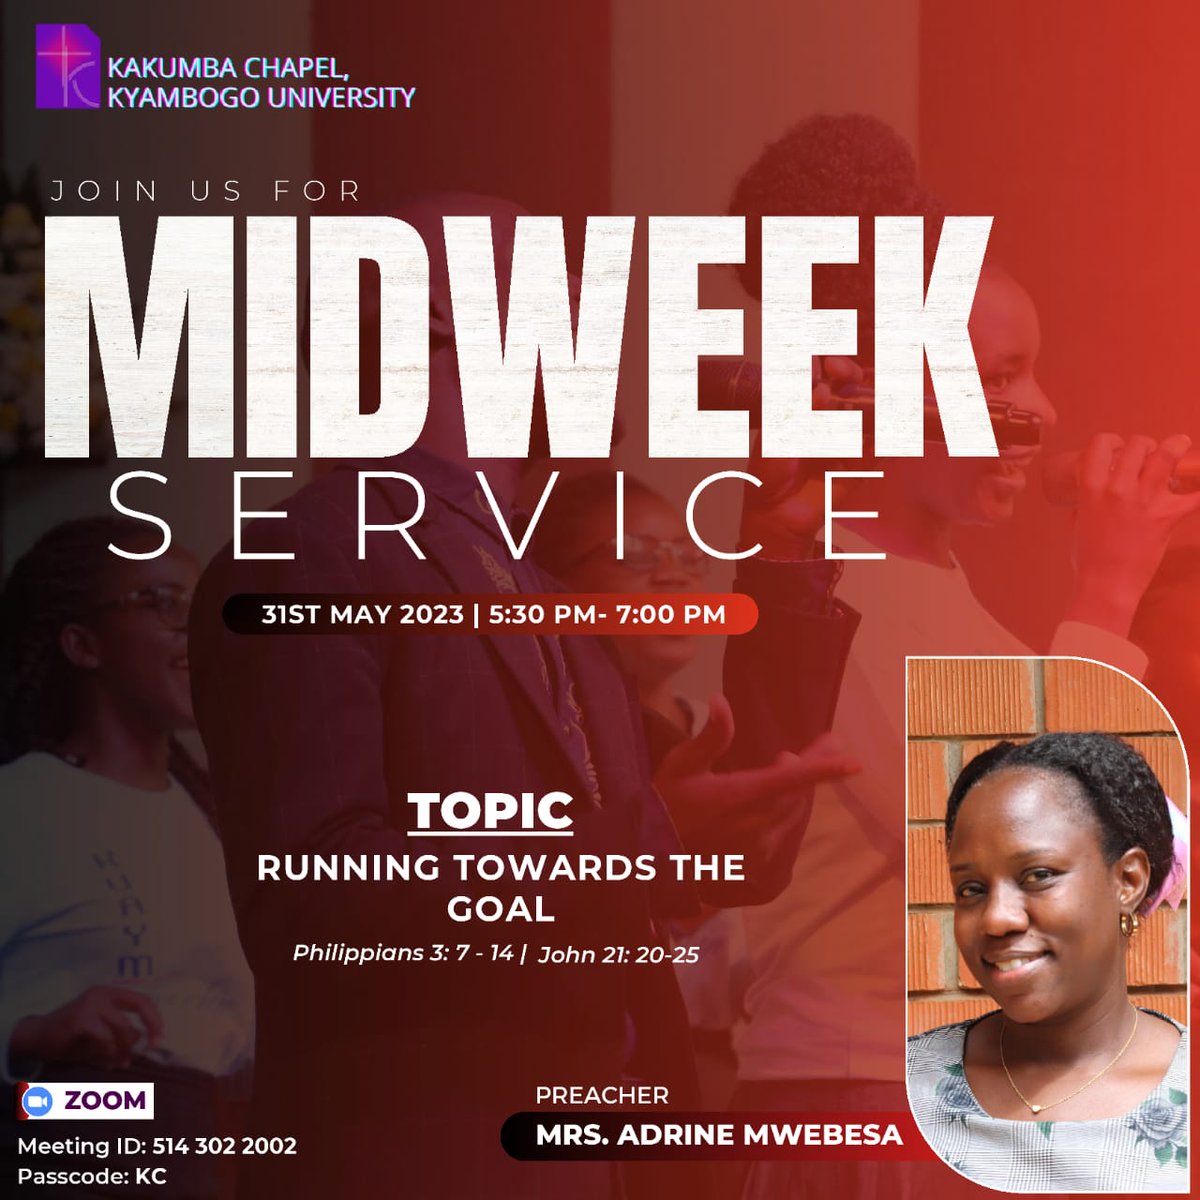 MIDWEEK SERVICE TODAY Join us at _5:30pm_ Physically at chapel and online via Zoom. Preacher: Mrs. Adrine Mwebesa Topic: Running towards the goal Zoom link us02web.zoom.us/j/5143022002?p… Meeting ID: 514 302 2002 Passcode: KC.